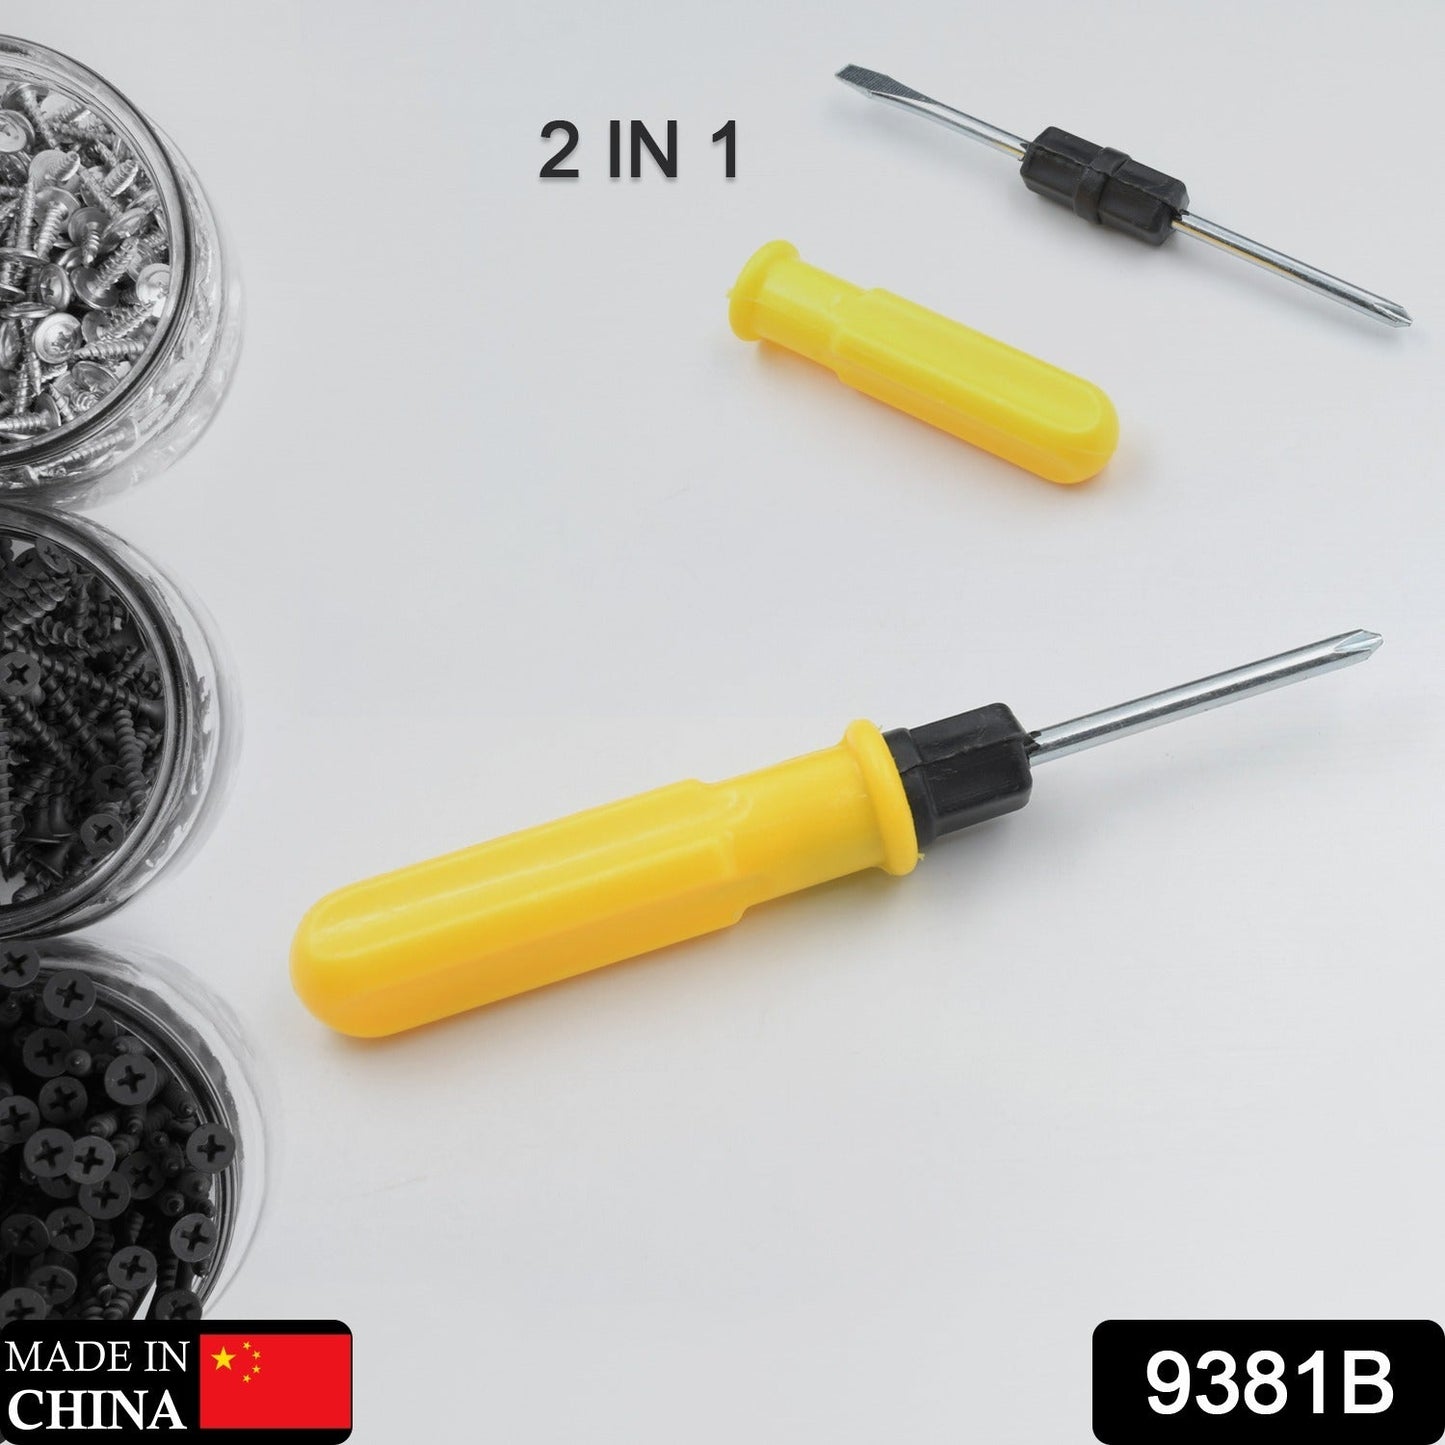 9381B Small Pocket Size 2 in 1 Slotted Cross Head Double Sided Flat Magnetic Screwdriver with PVC Plastic Coated Handle (1 Pc)